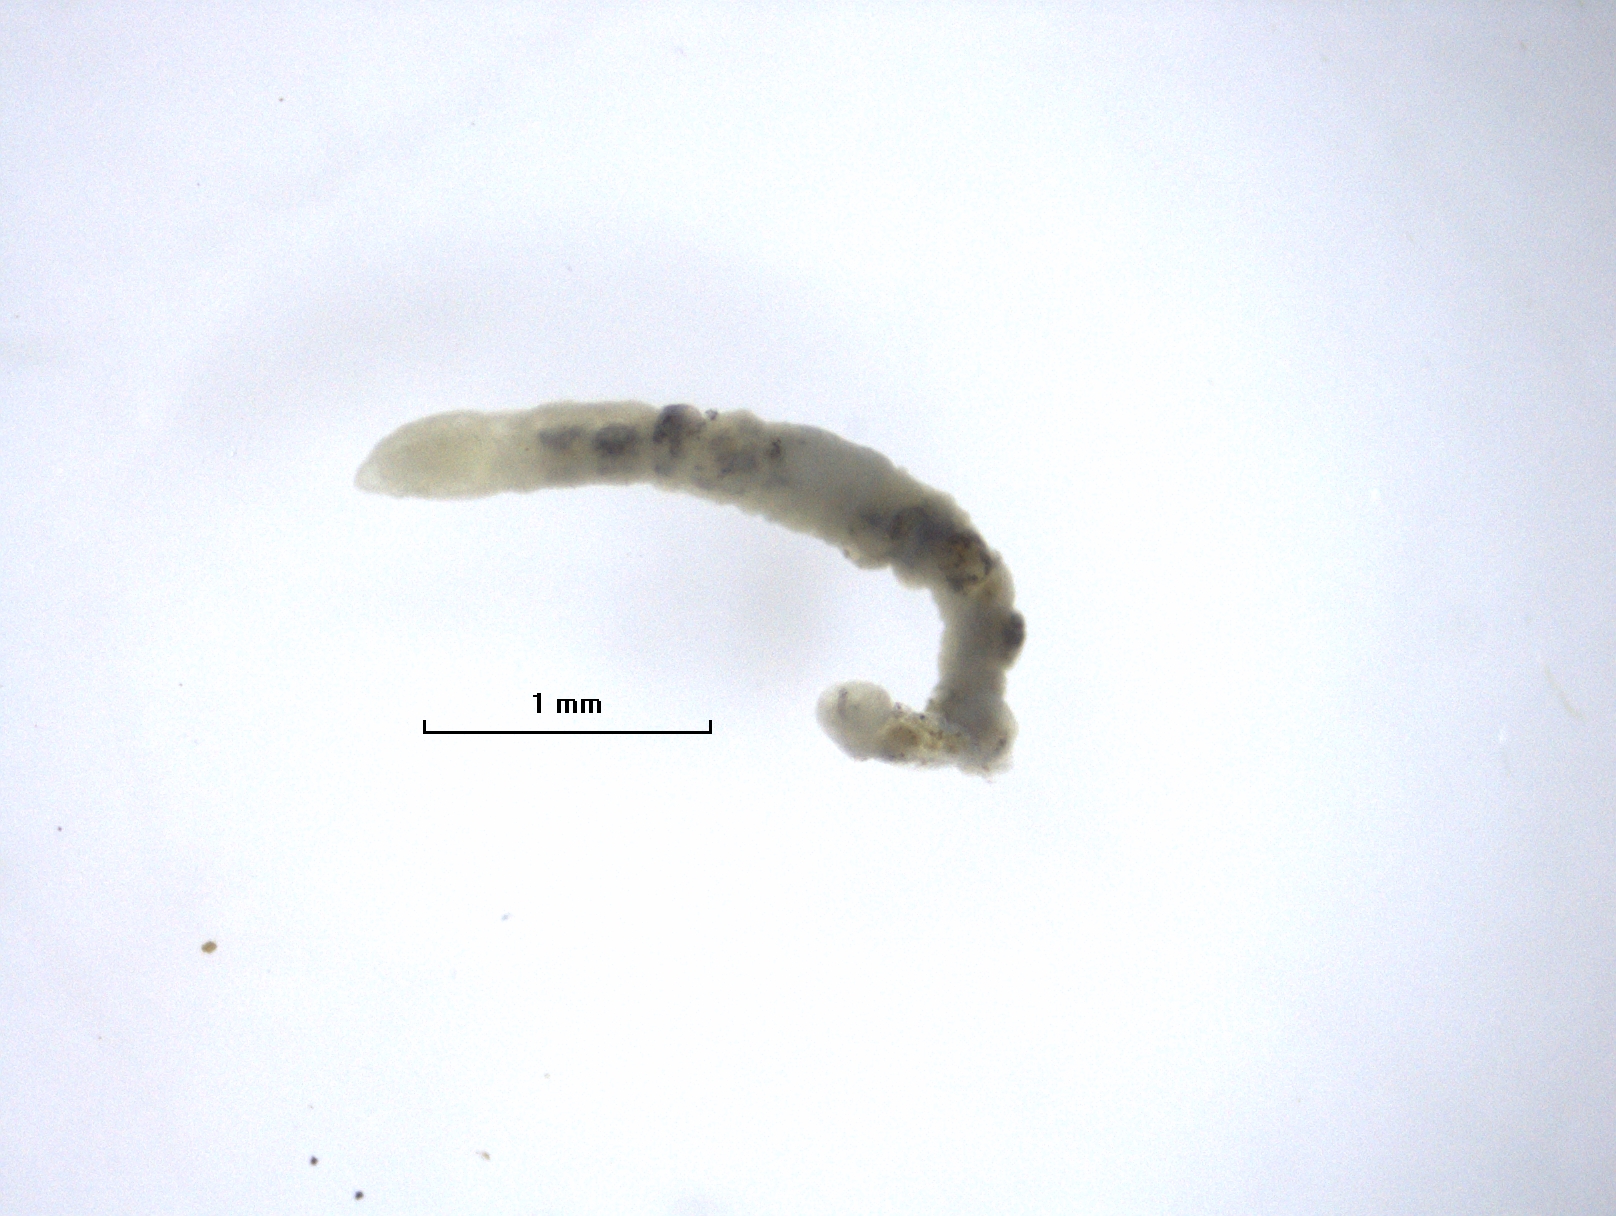 Photomicrograph of a tubificid worm